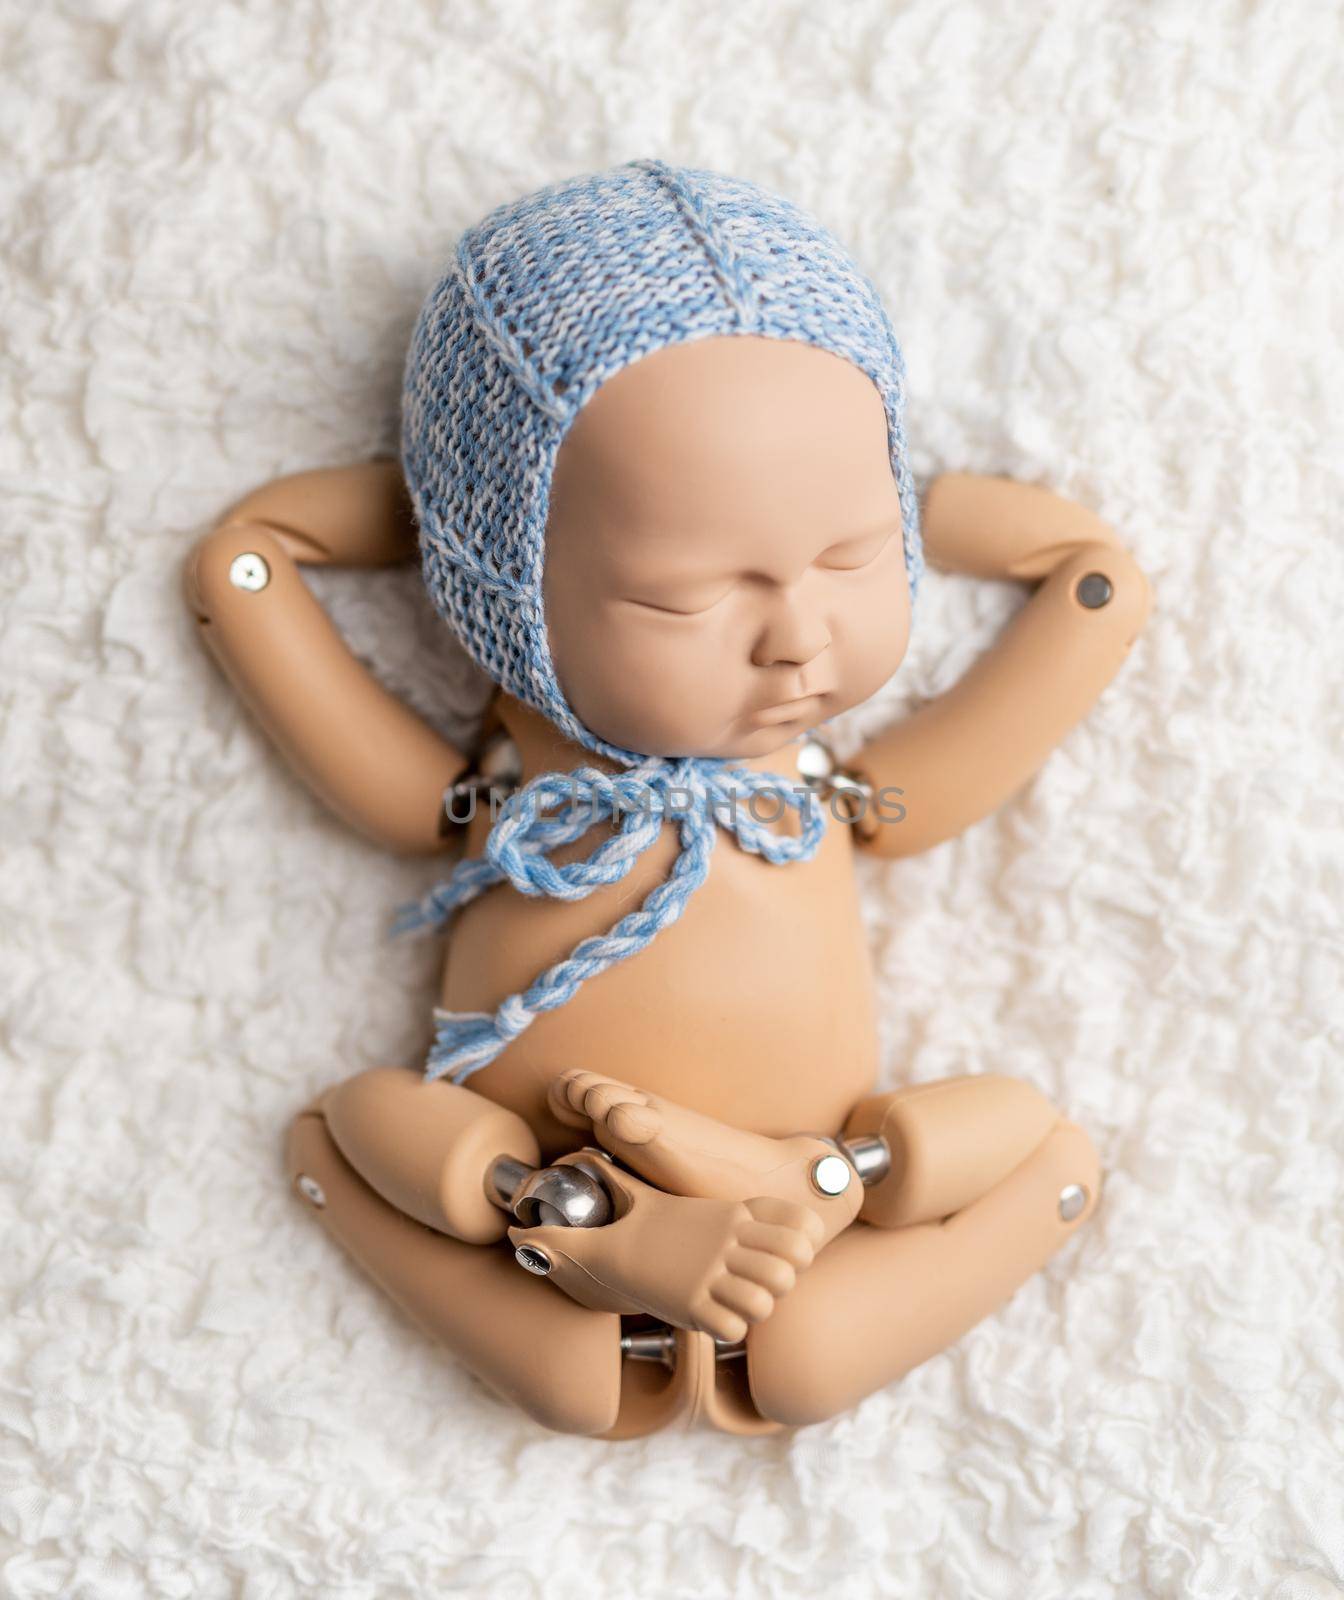 Cute toy of newborn baby for photo practice,